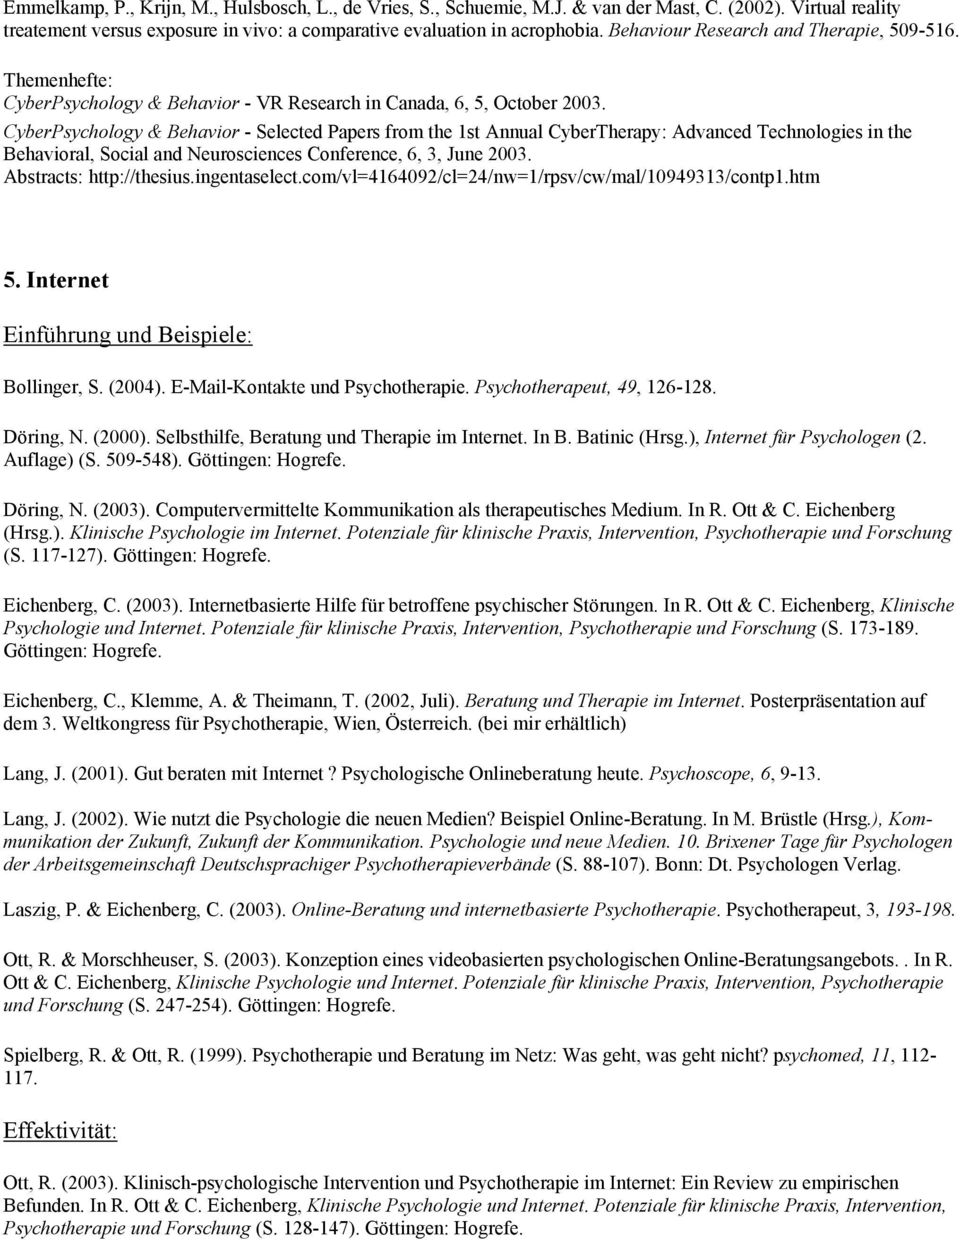 CyberPsychology & Behavior - Selected Papers from the 1st Annual CyberTherapy: Advanced Technologies in the Behavioral, Social and Neurosciences Conference, 6, 3, June 2003. Abstracts: http://thesius.